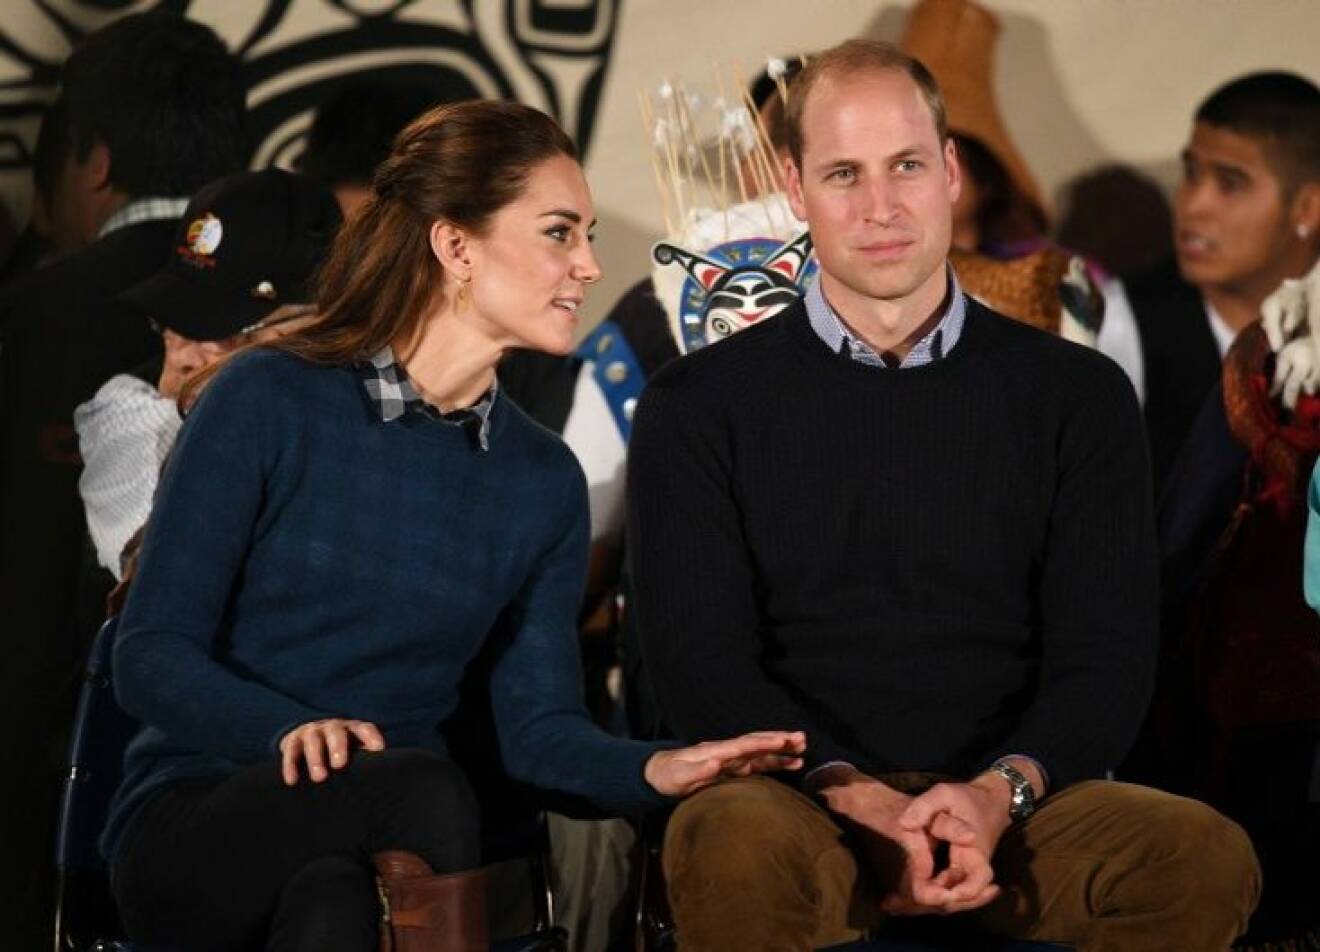 The Duke and Duchess of Cambridge visit Canada - 26 Sep 2016